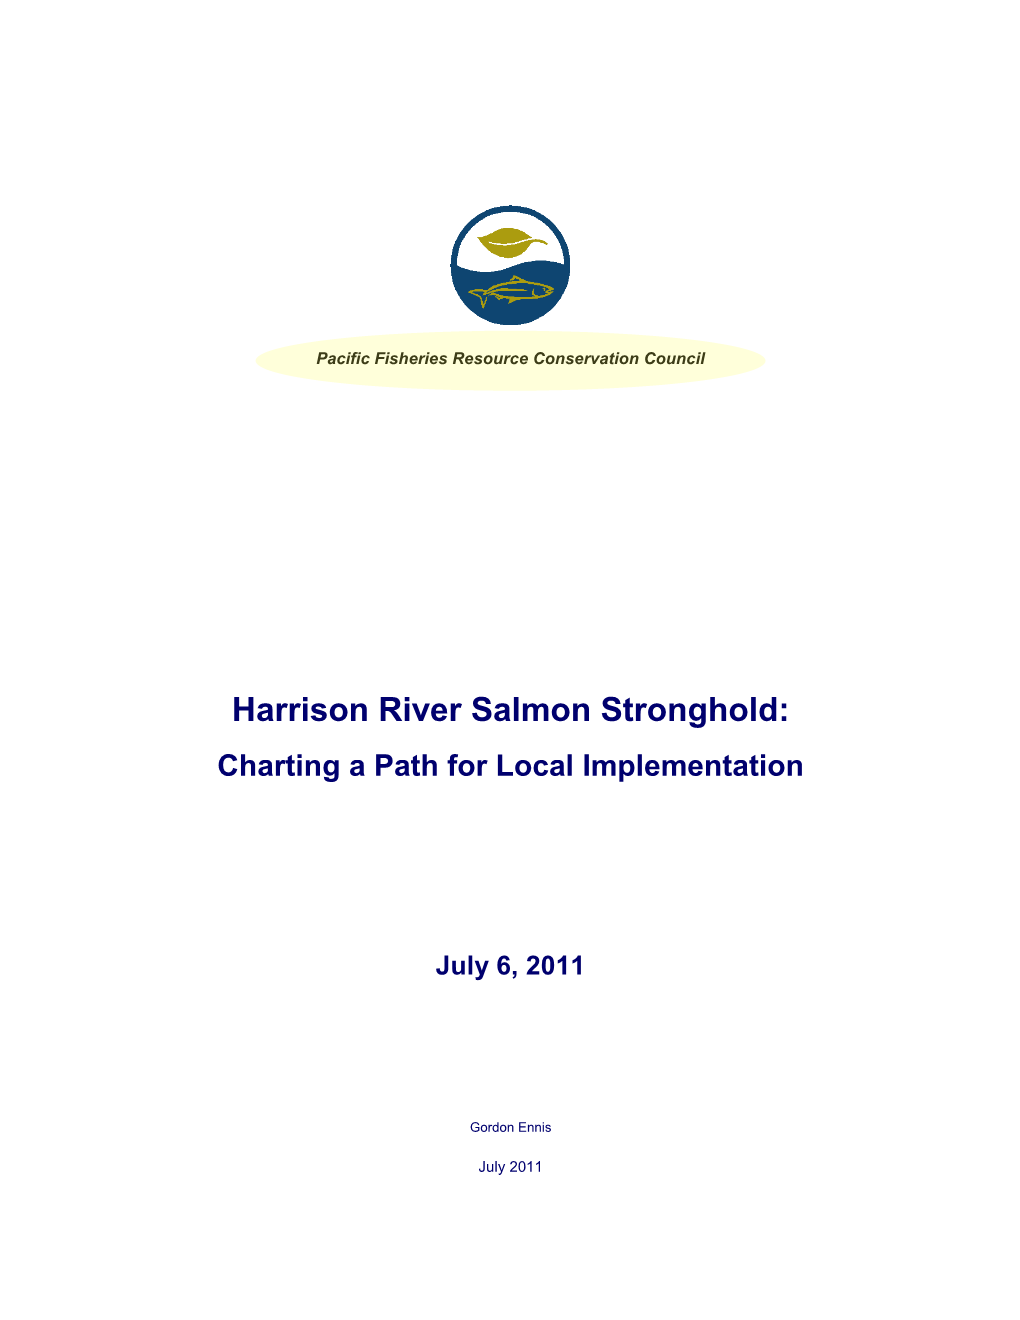 Harrison River Salmon Stronghold: Charting a Path for Local Implementation